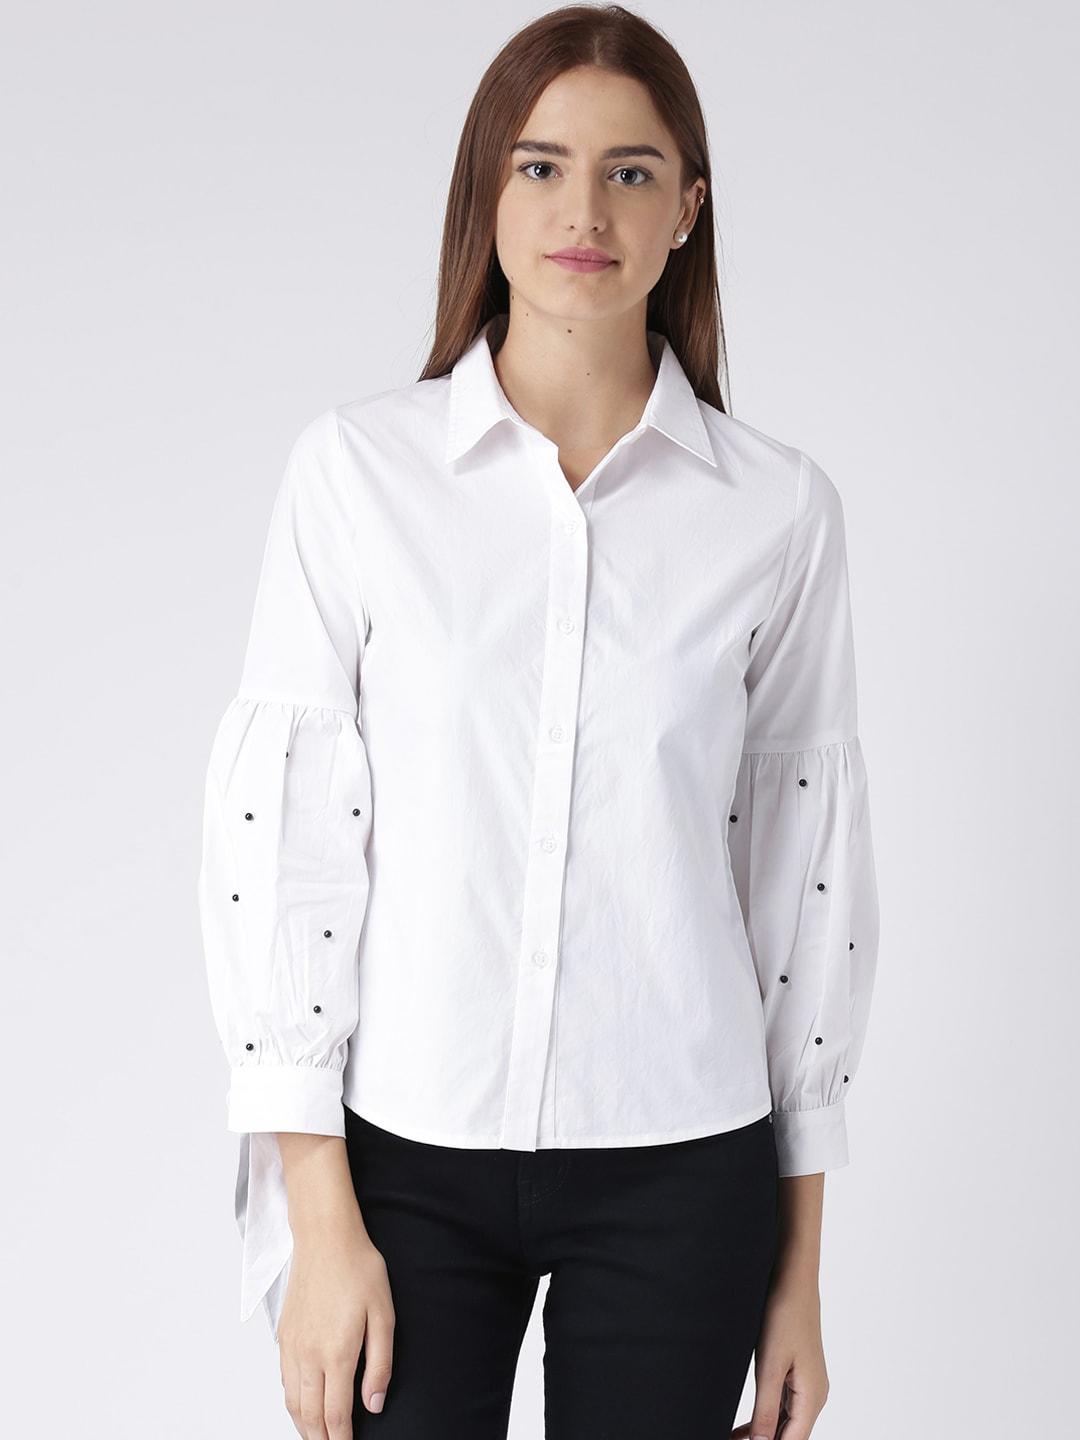 kassually women white comfort regular fit solid casual shirt